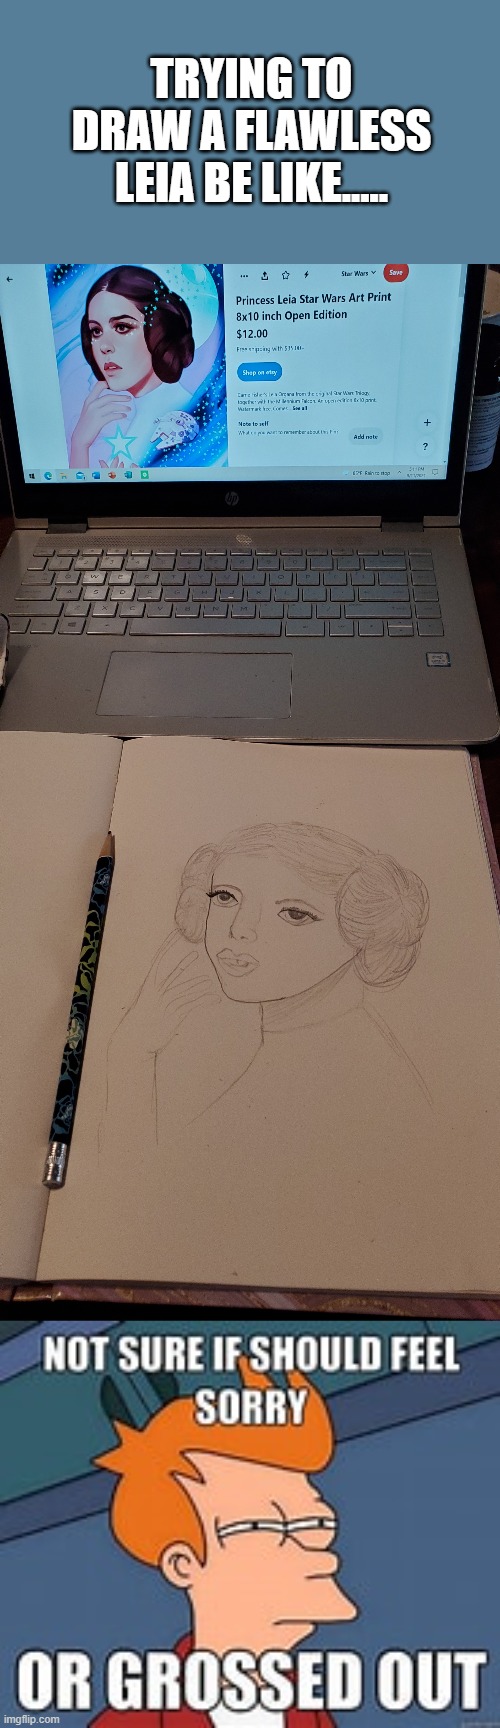 Well, at least you tried... | TRYING TO DRAW A FLAWLESS LEIA BE LIKE..... | image tagged in princess leia,drawing,funny,fail,lol,leia | made w/ Imgflip meme maker